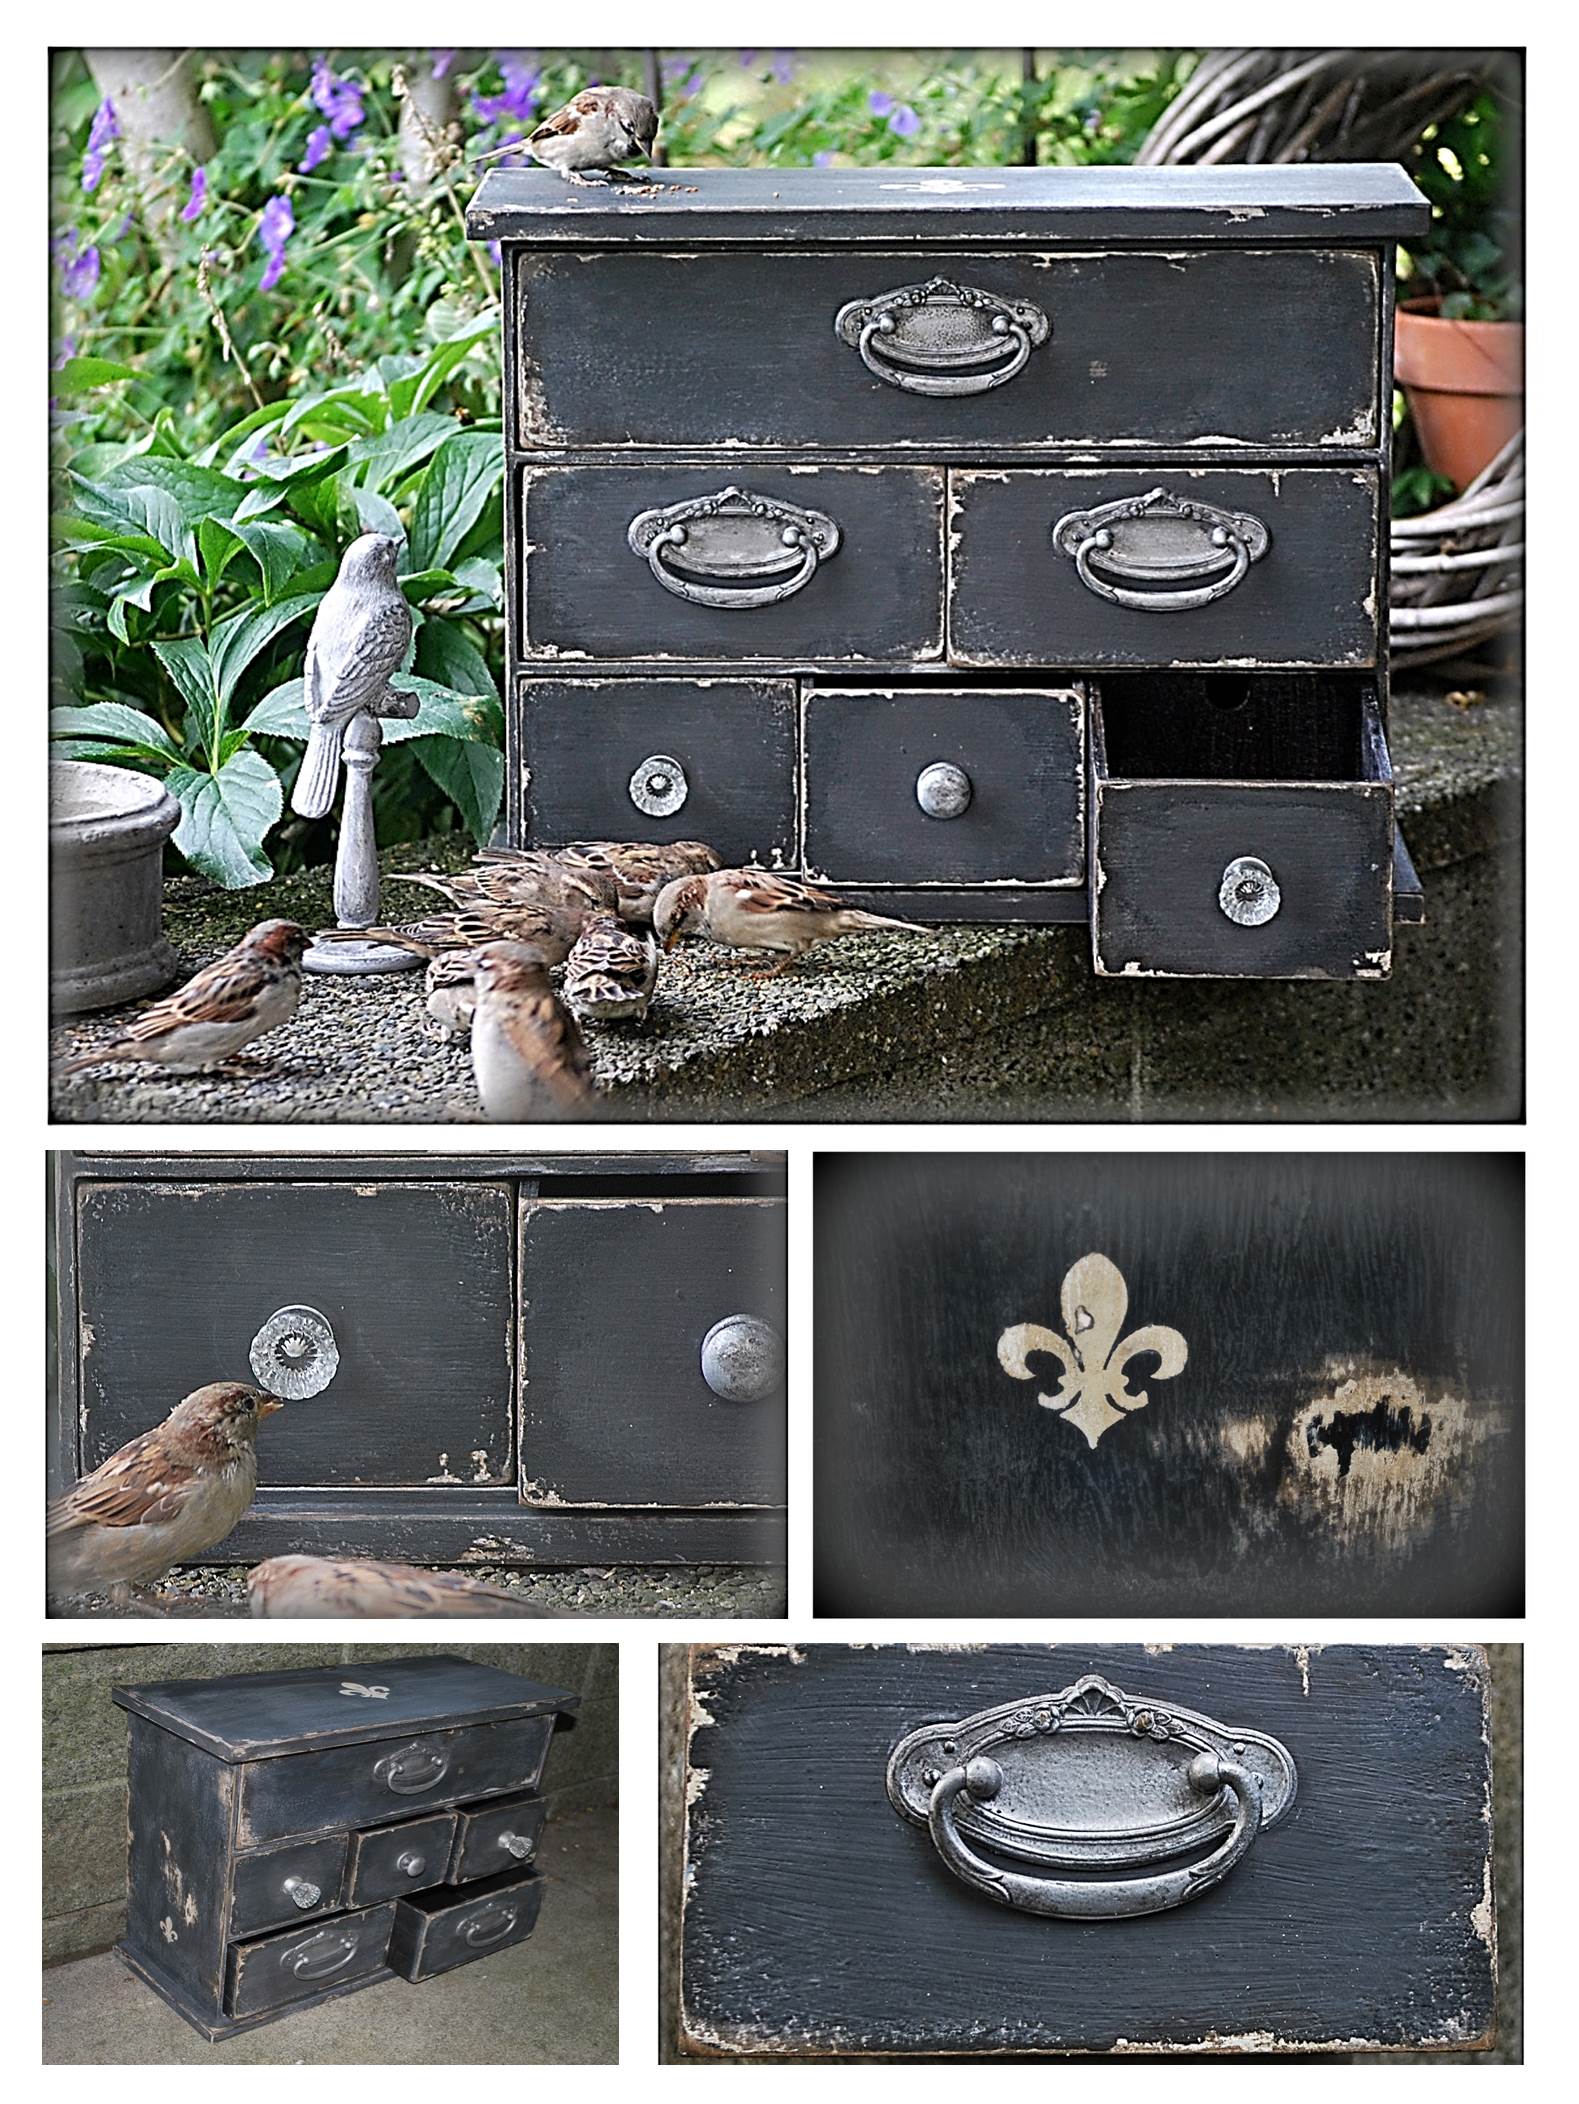 This rustic cabinet is painted with chalkboard paint and distressed for a wore, vintage look